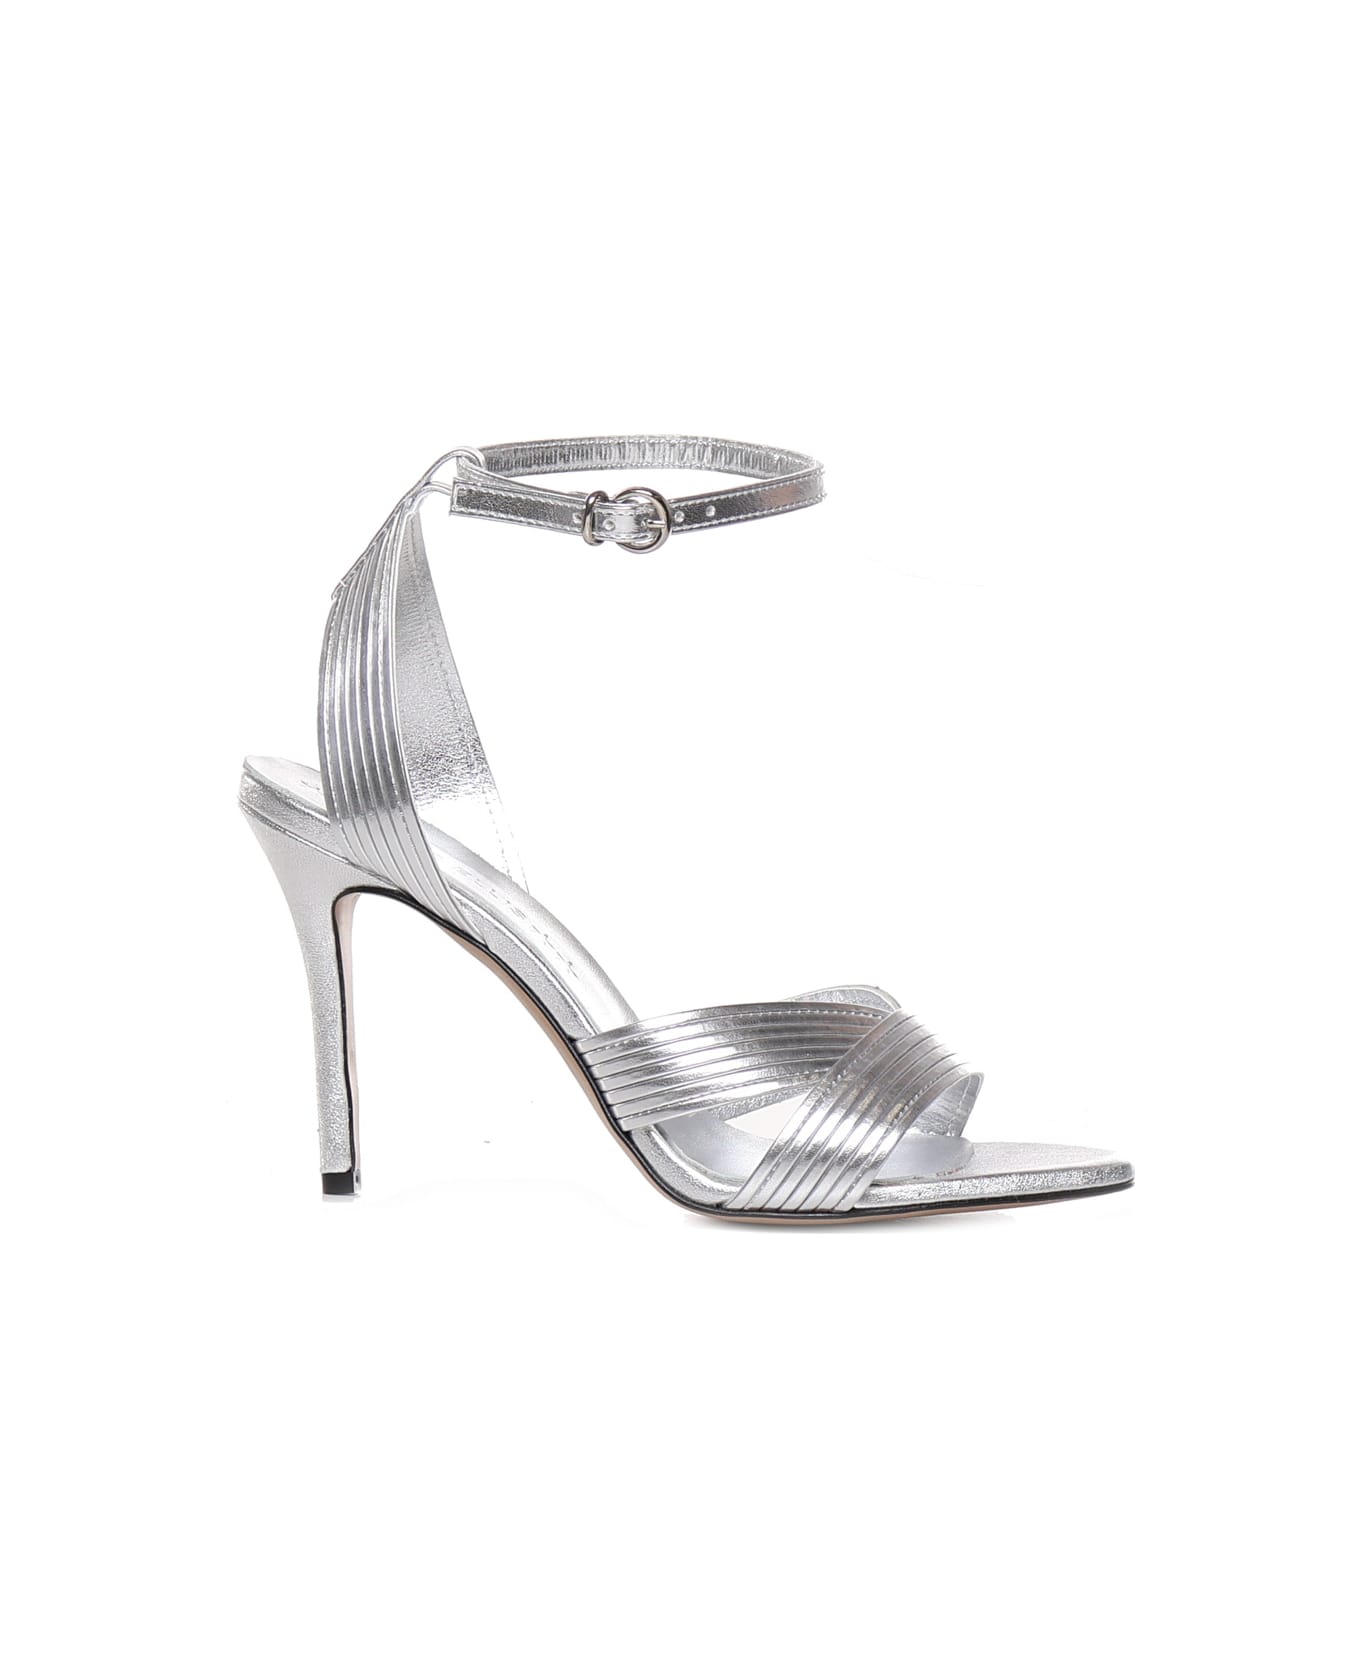 Marc Ellis Sandals With Heel And Lamè Bands - Silver サンダル